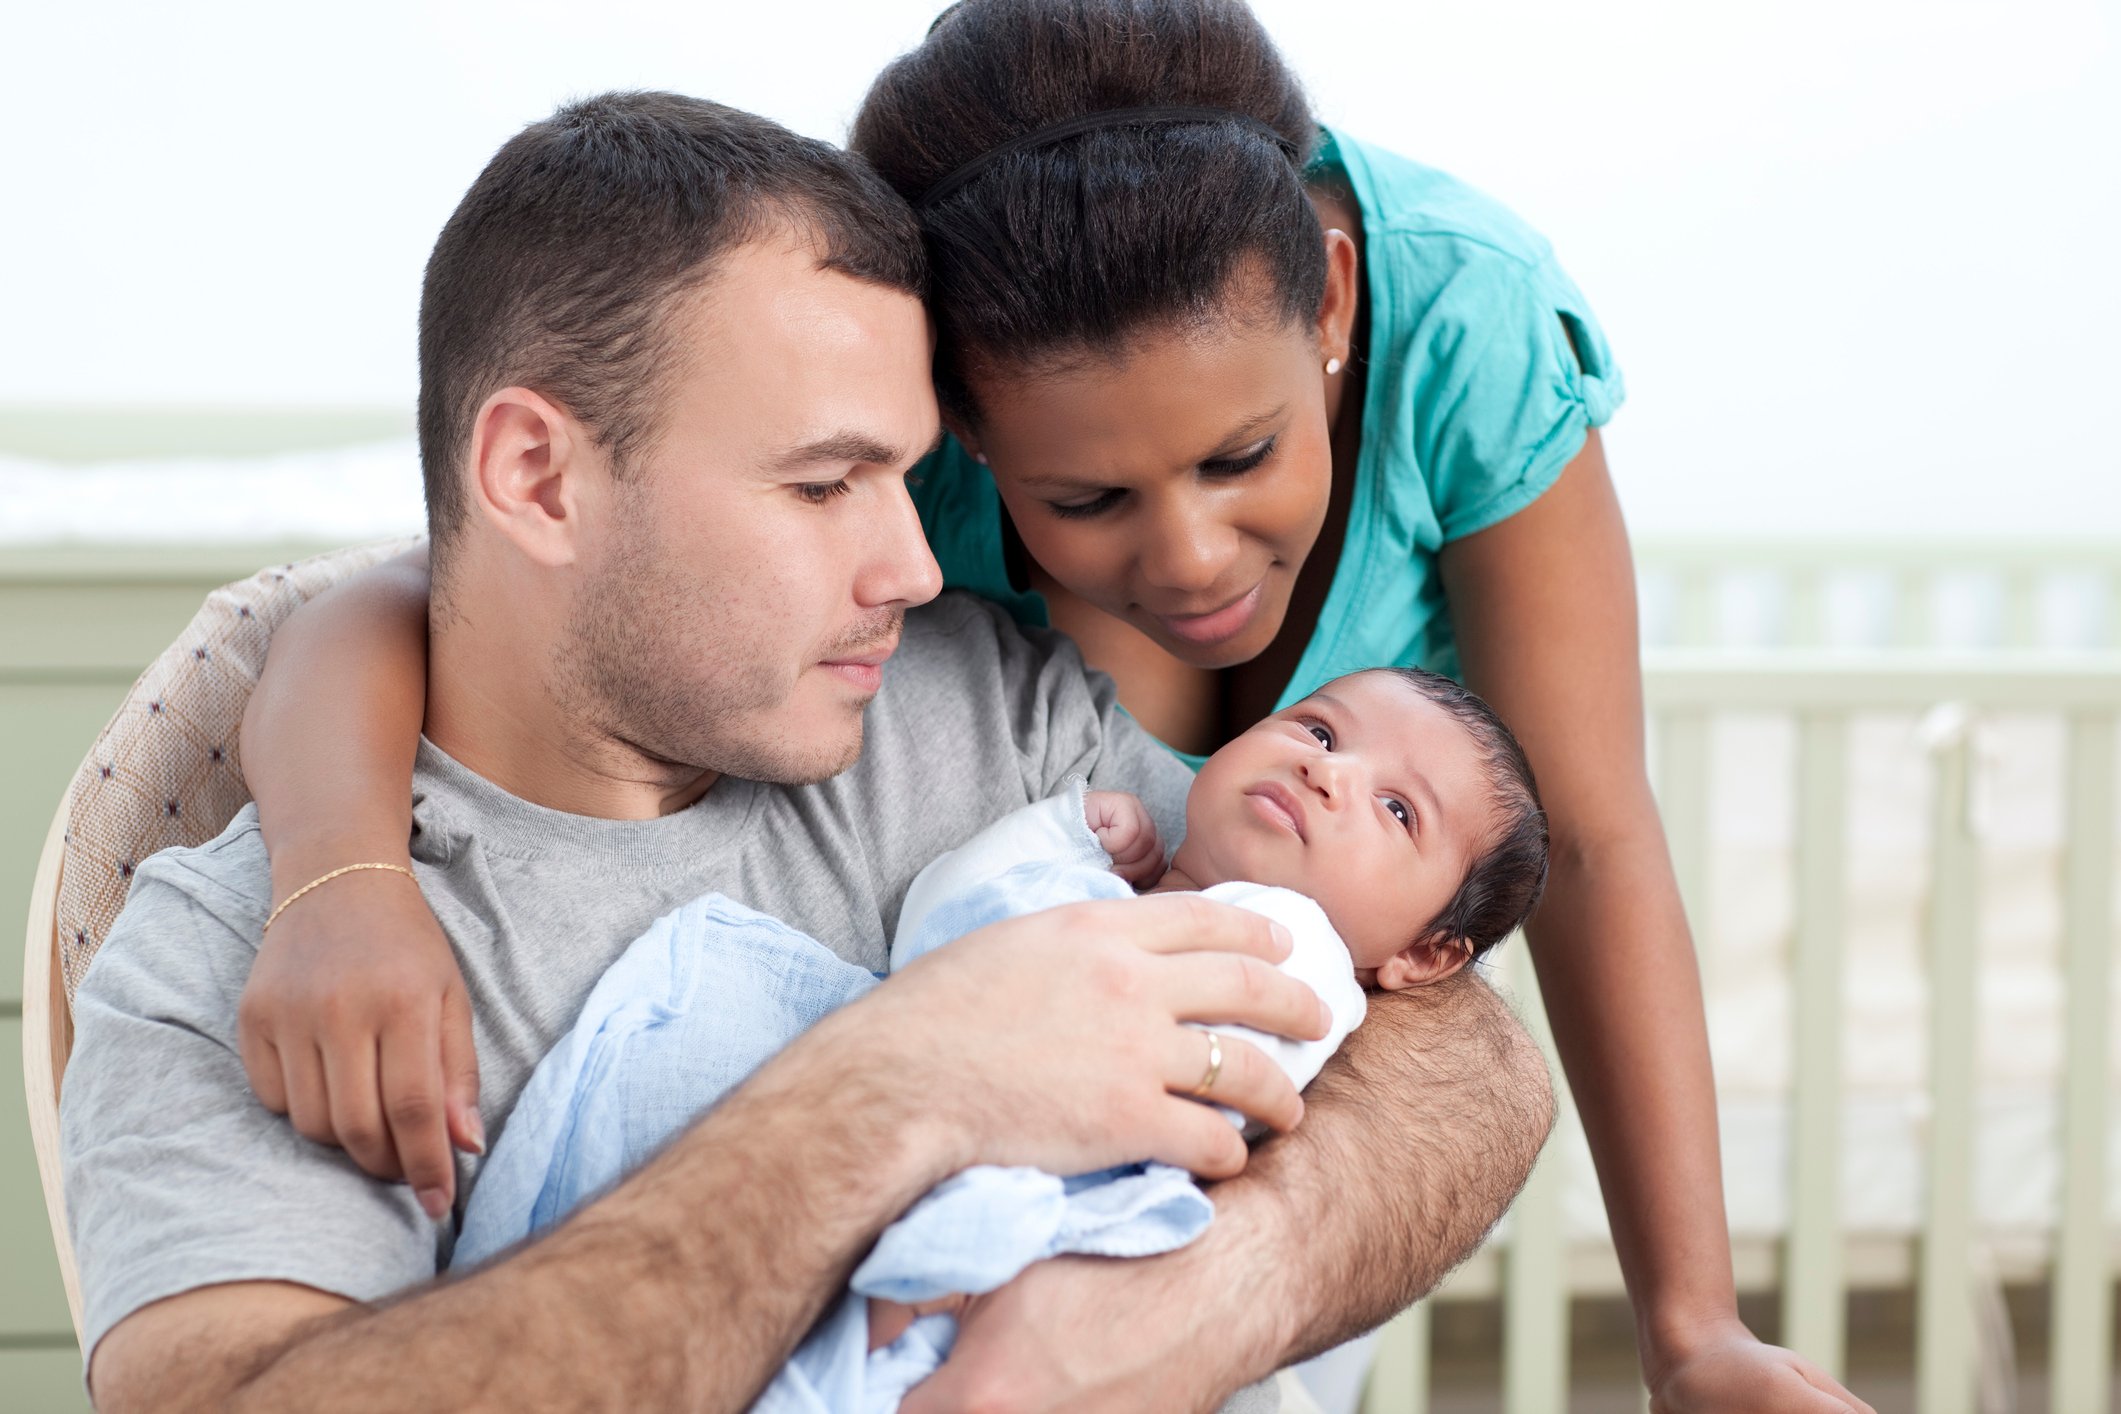 3 Things My White Husband Needs to Know About the Black Baby Were Going to Have pic